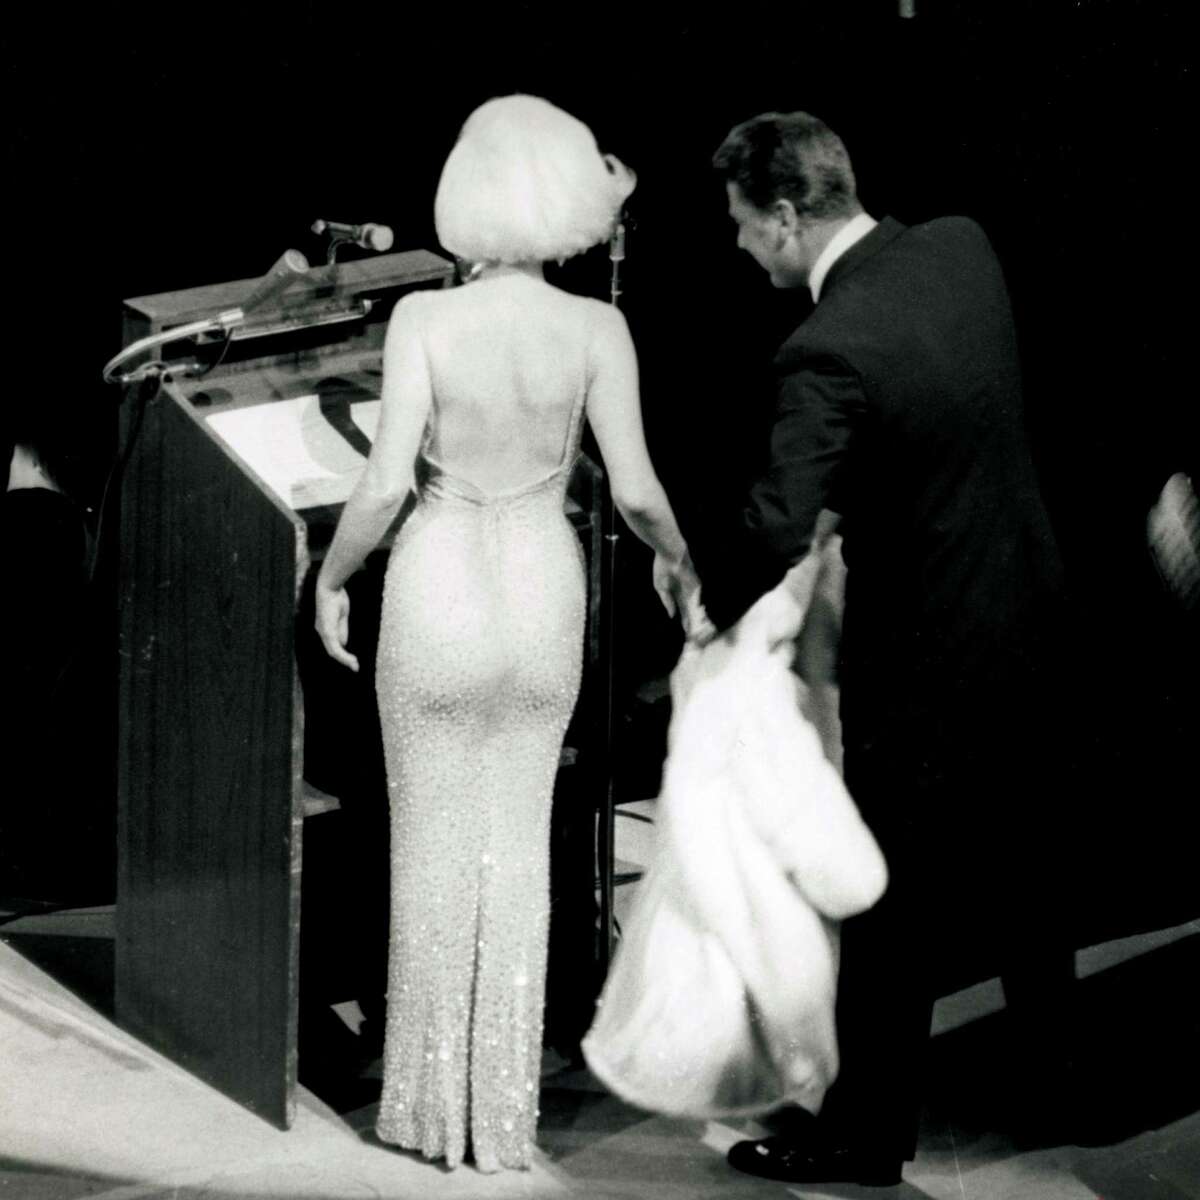 In this May 19, 1962 publicity photo provided by Running Press, Peter Lawford, right, tends to Marilyn Monroe's fur as she prepares to sing "Happy Birthday" to President John F. Kennedy at a Madison Square Garden gala in New York.